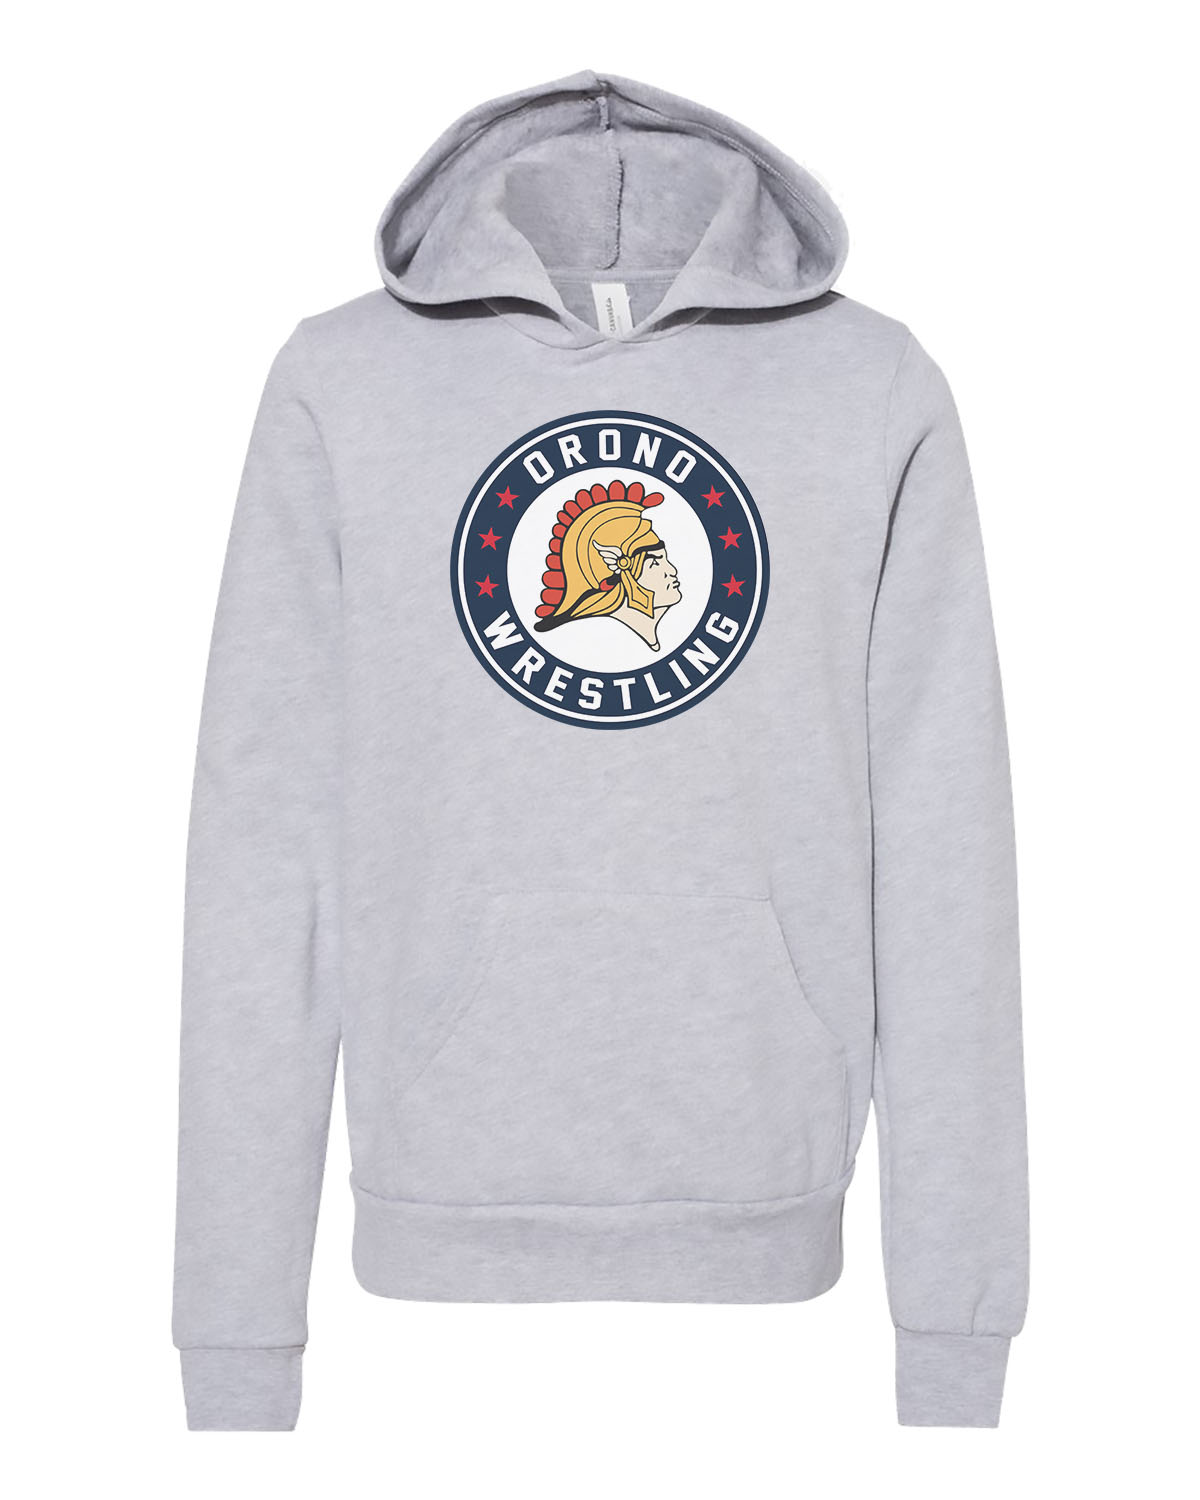 Orono Wrestling // Youth Hoodie